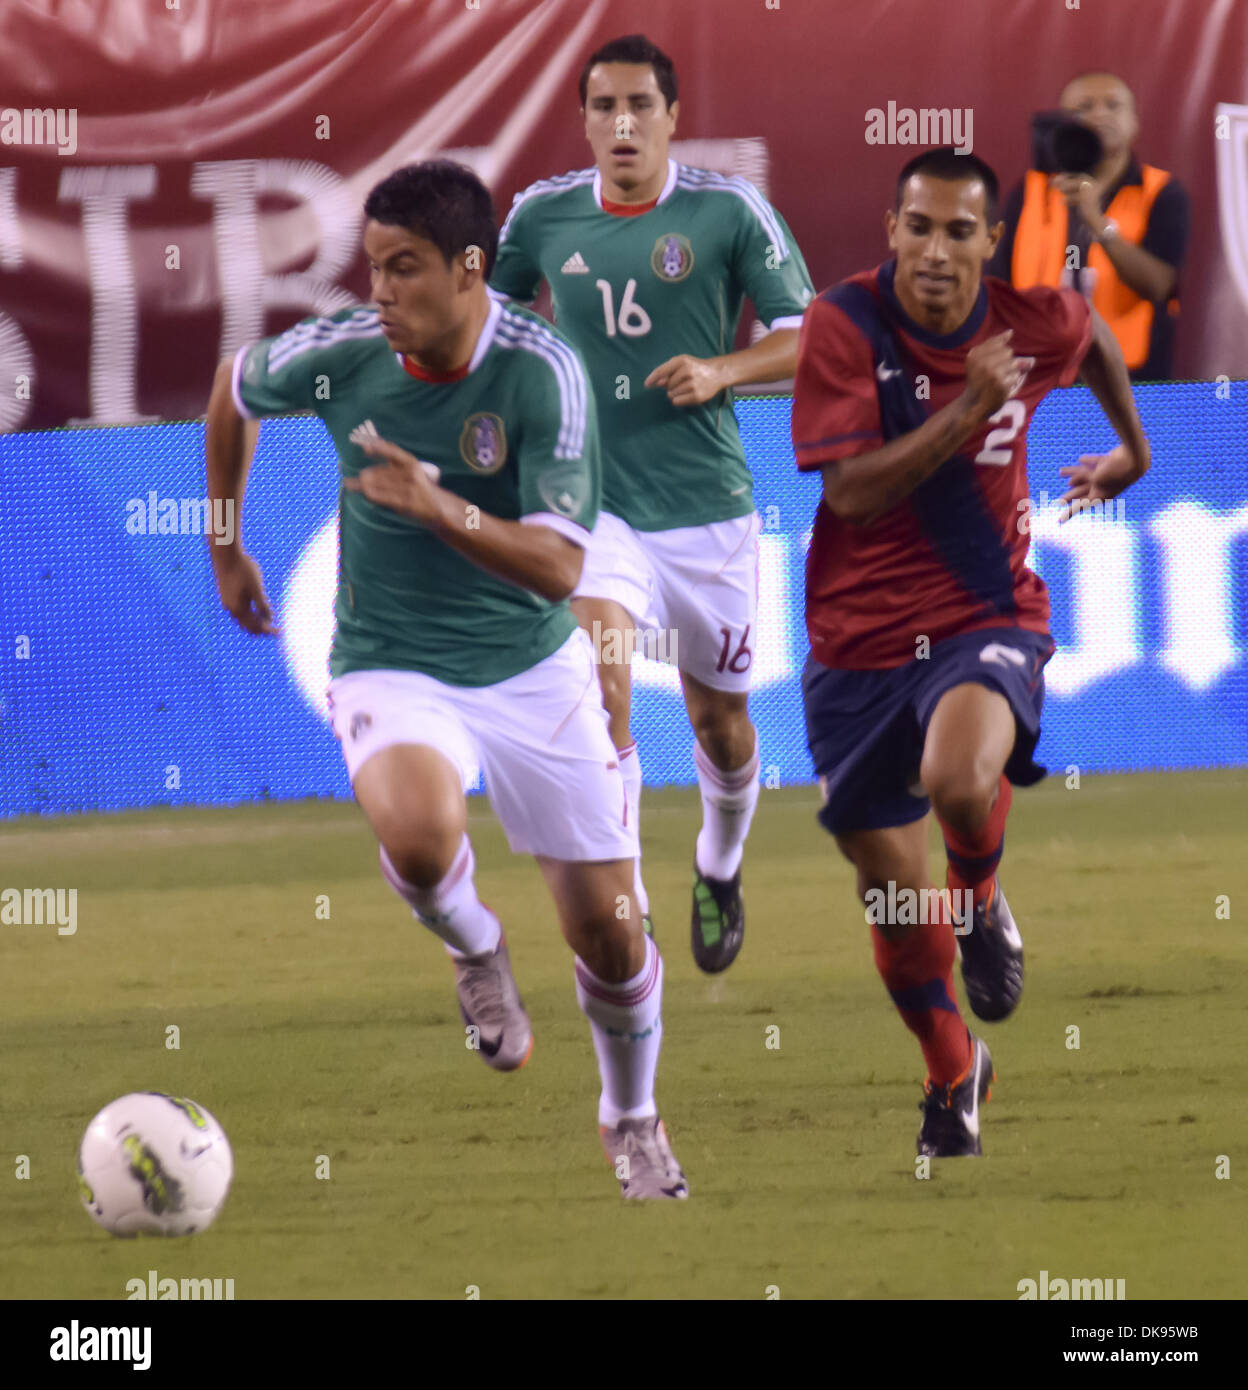 Aug. 10, 2011 - Philadelphia, PA, USA - US National Team player, EDGAR CASTILLO, fights for the ball against Mexico player, FRANCISCO JAVIER RODRIGUEZ, during a friendly match with Mexico held at Lincoln Financial Field in Philadelphia Pa. (Credit Image: © Ricky Fitchett/ZUMAPRESS.com) Stock Photo